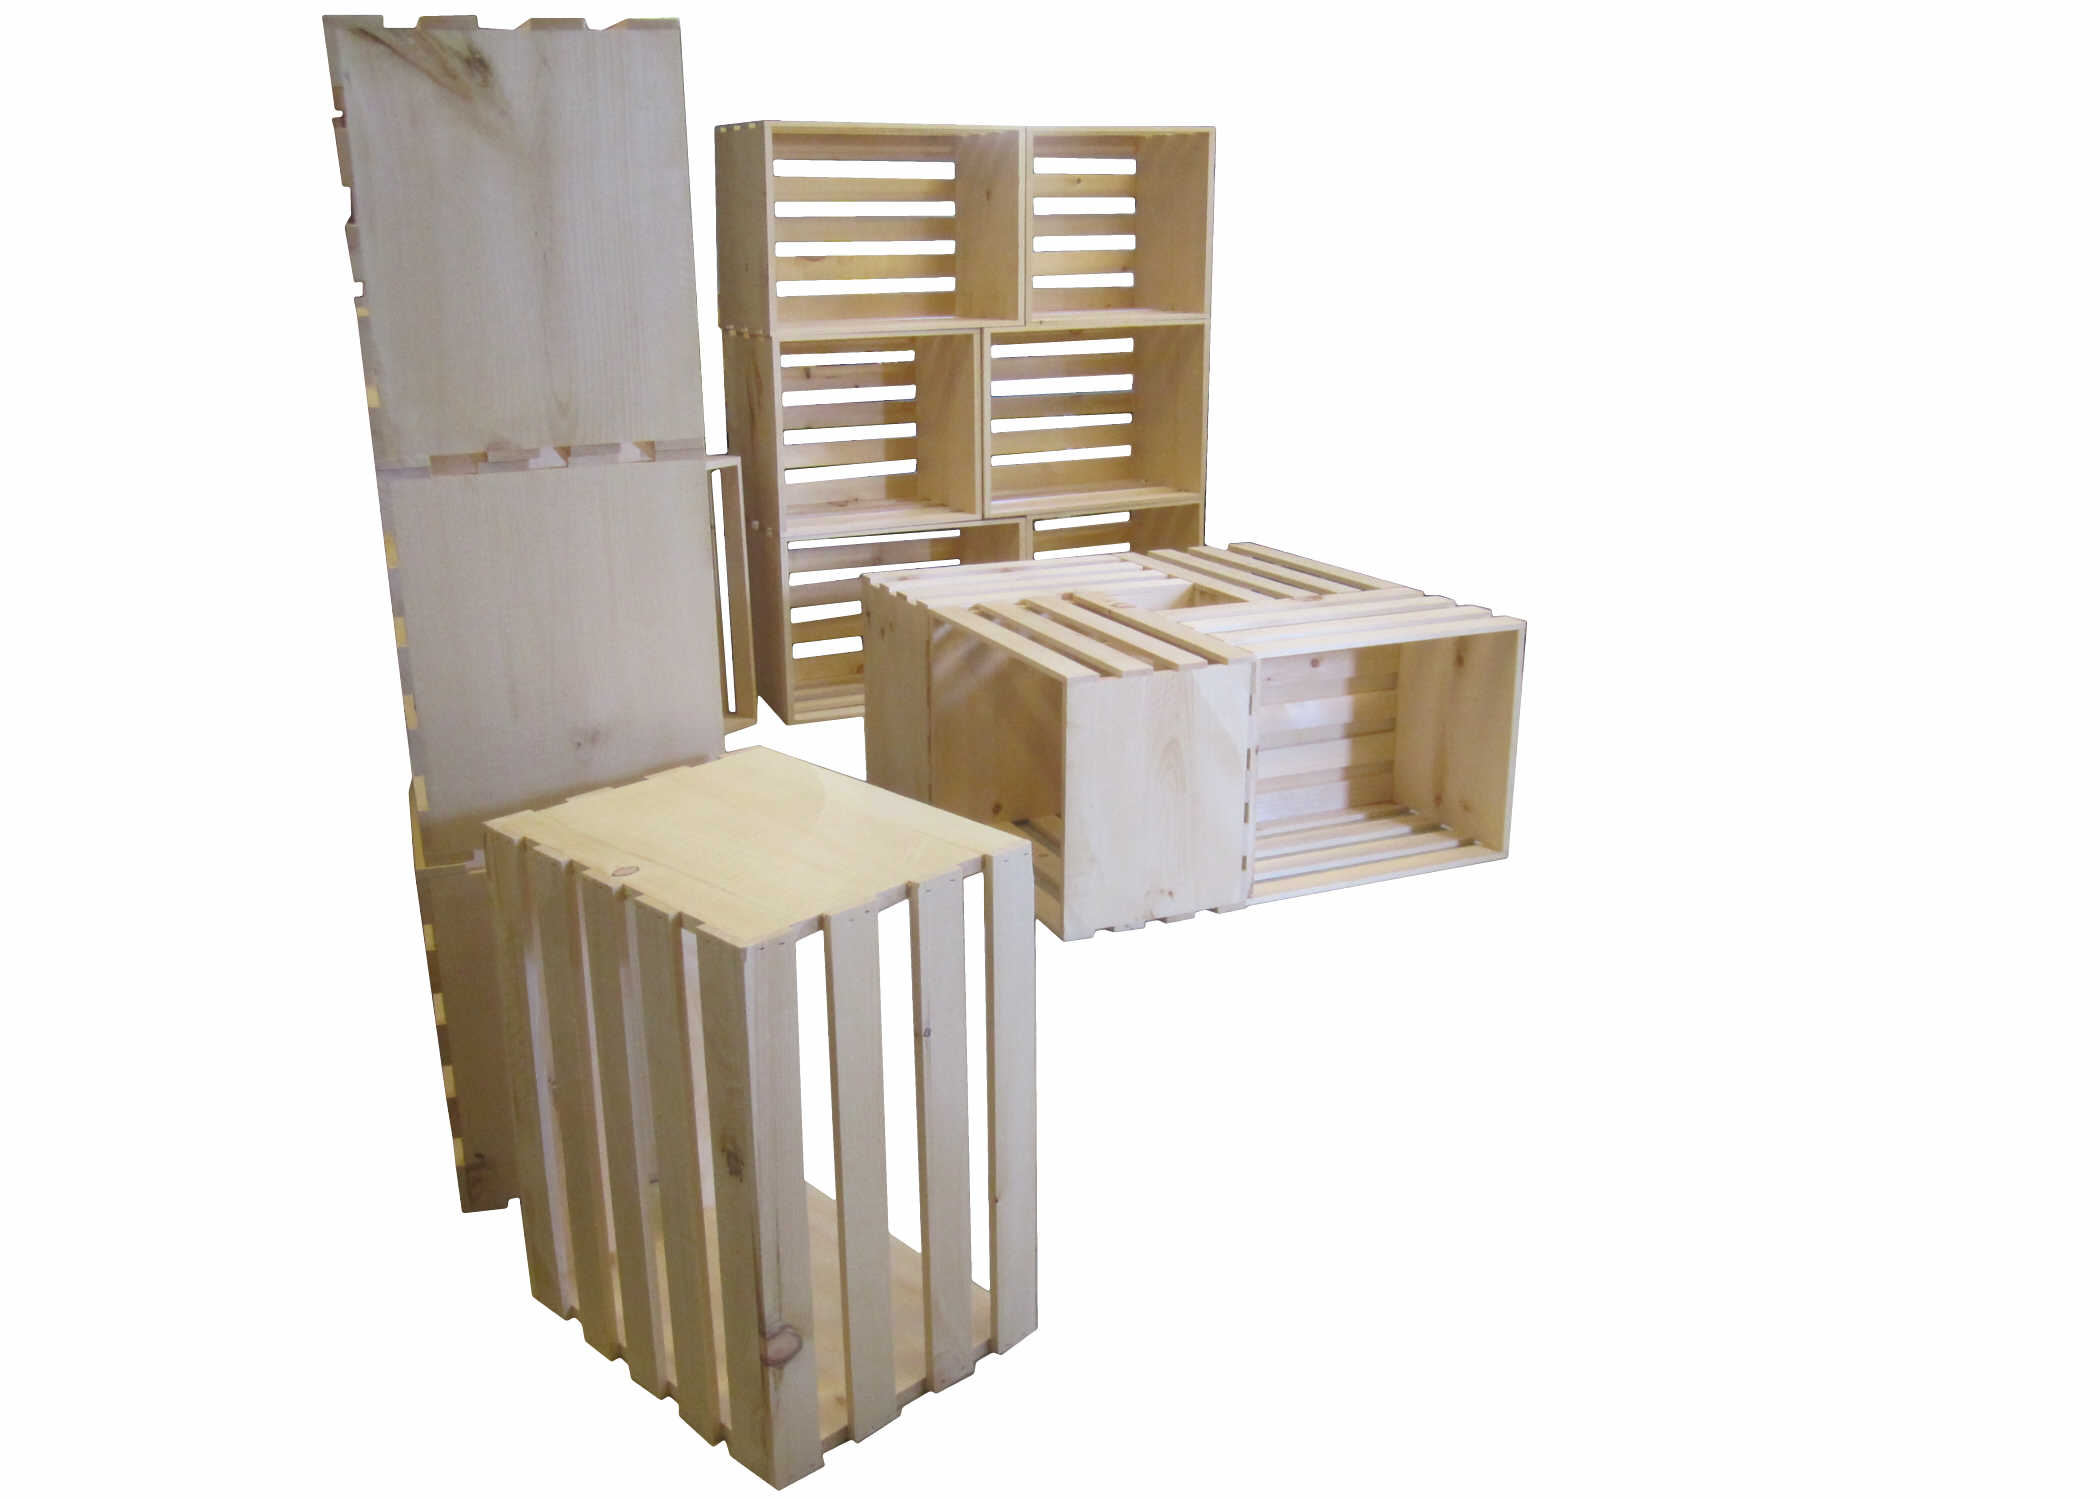 custom made crates are a great way to sell more of your product to your retailers.jpg